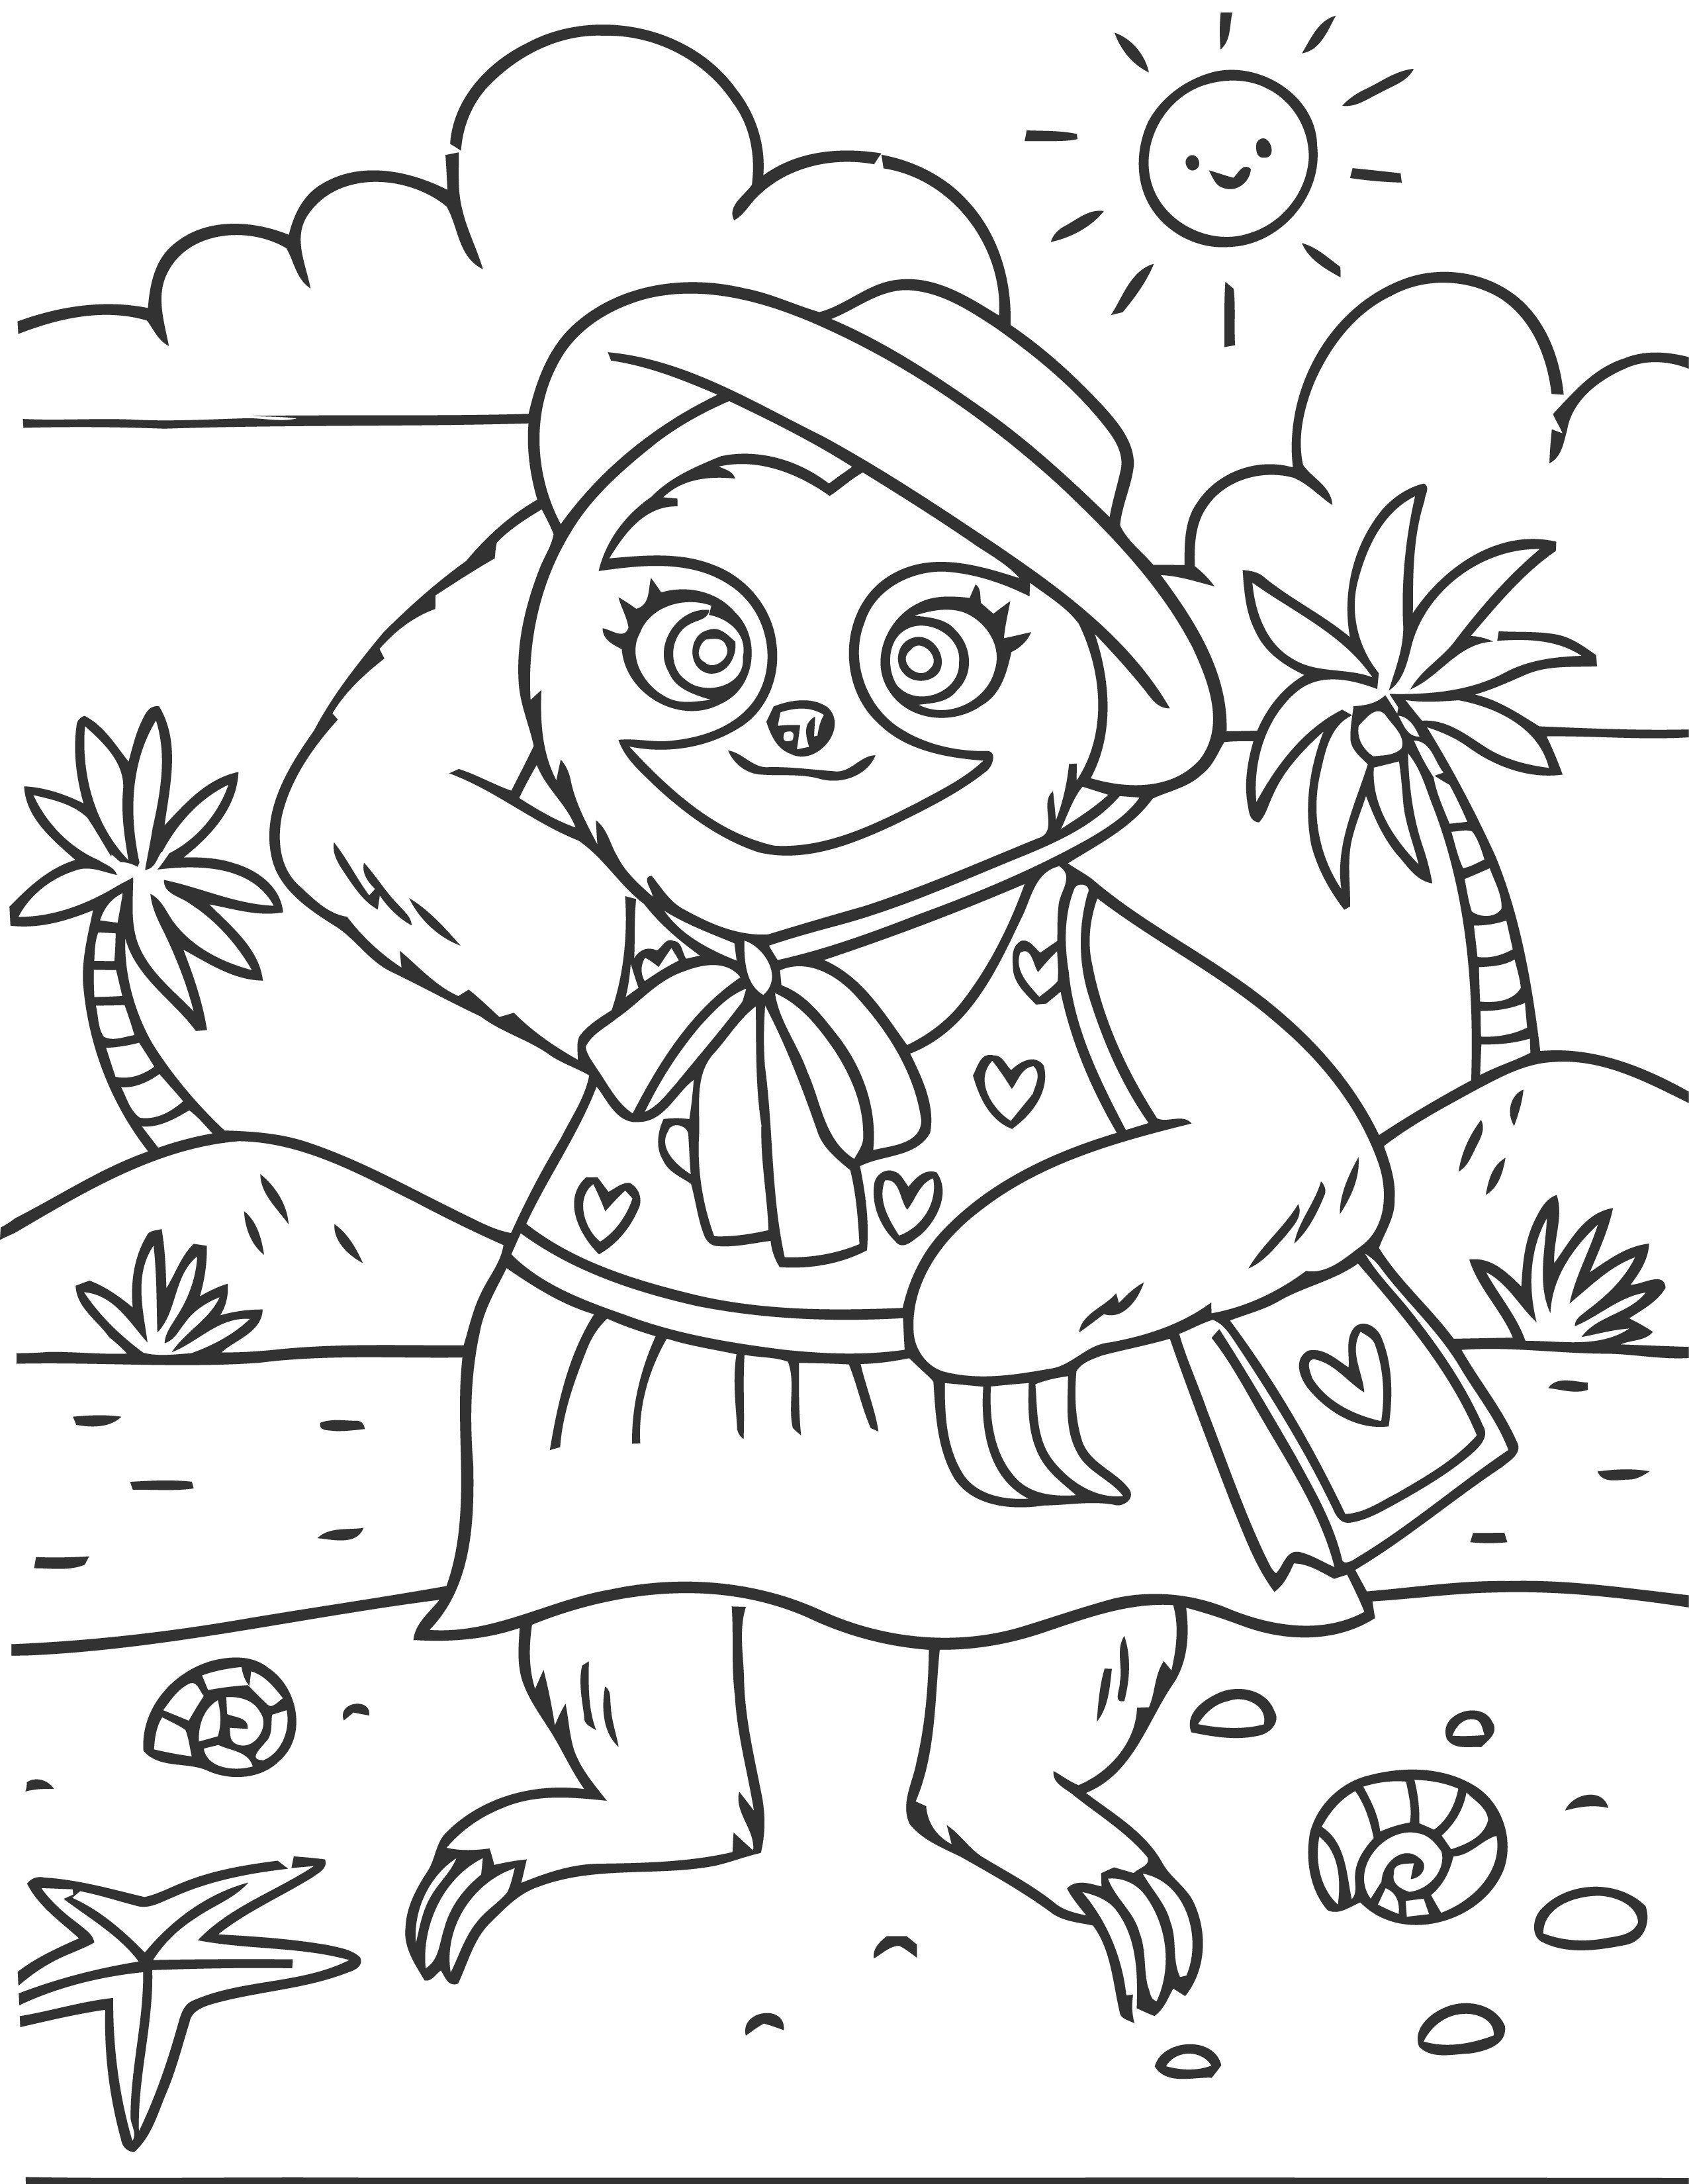 Give funny sloth coloring pages in hrs by sopnaislam